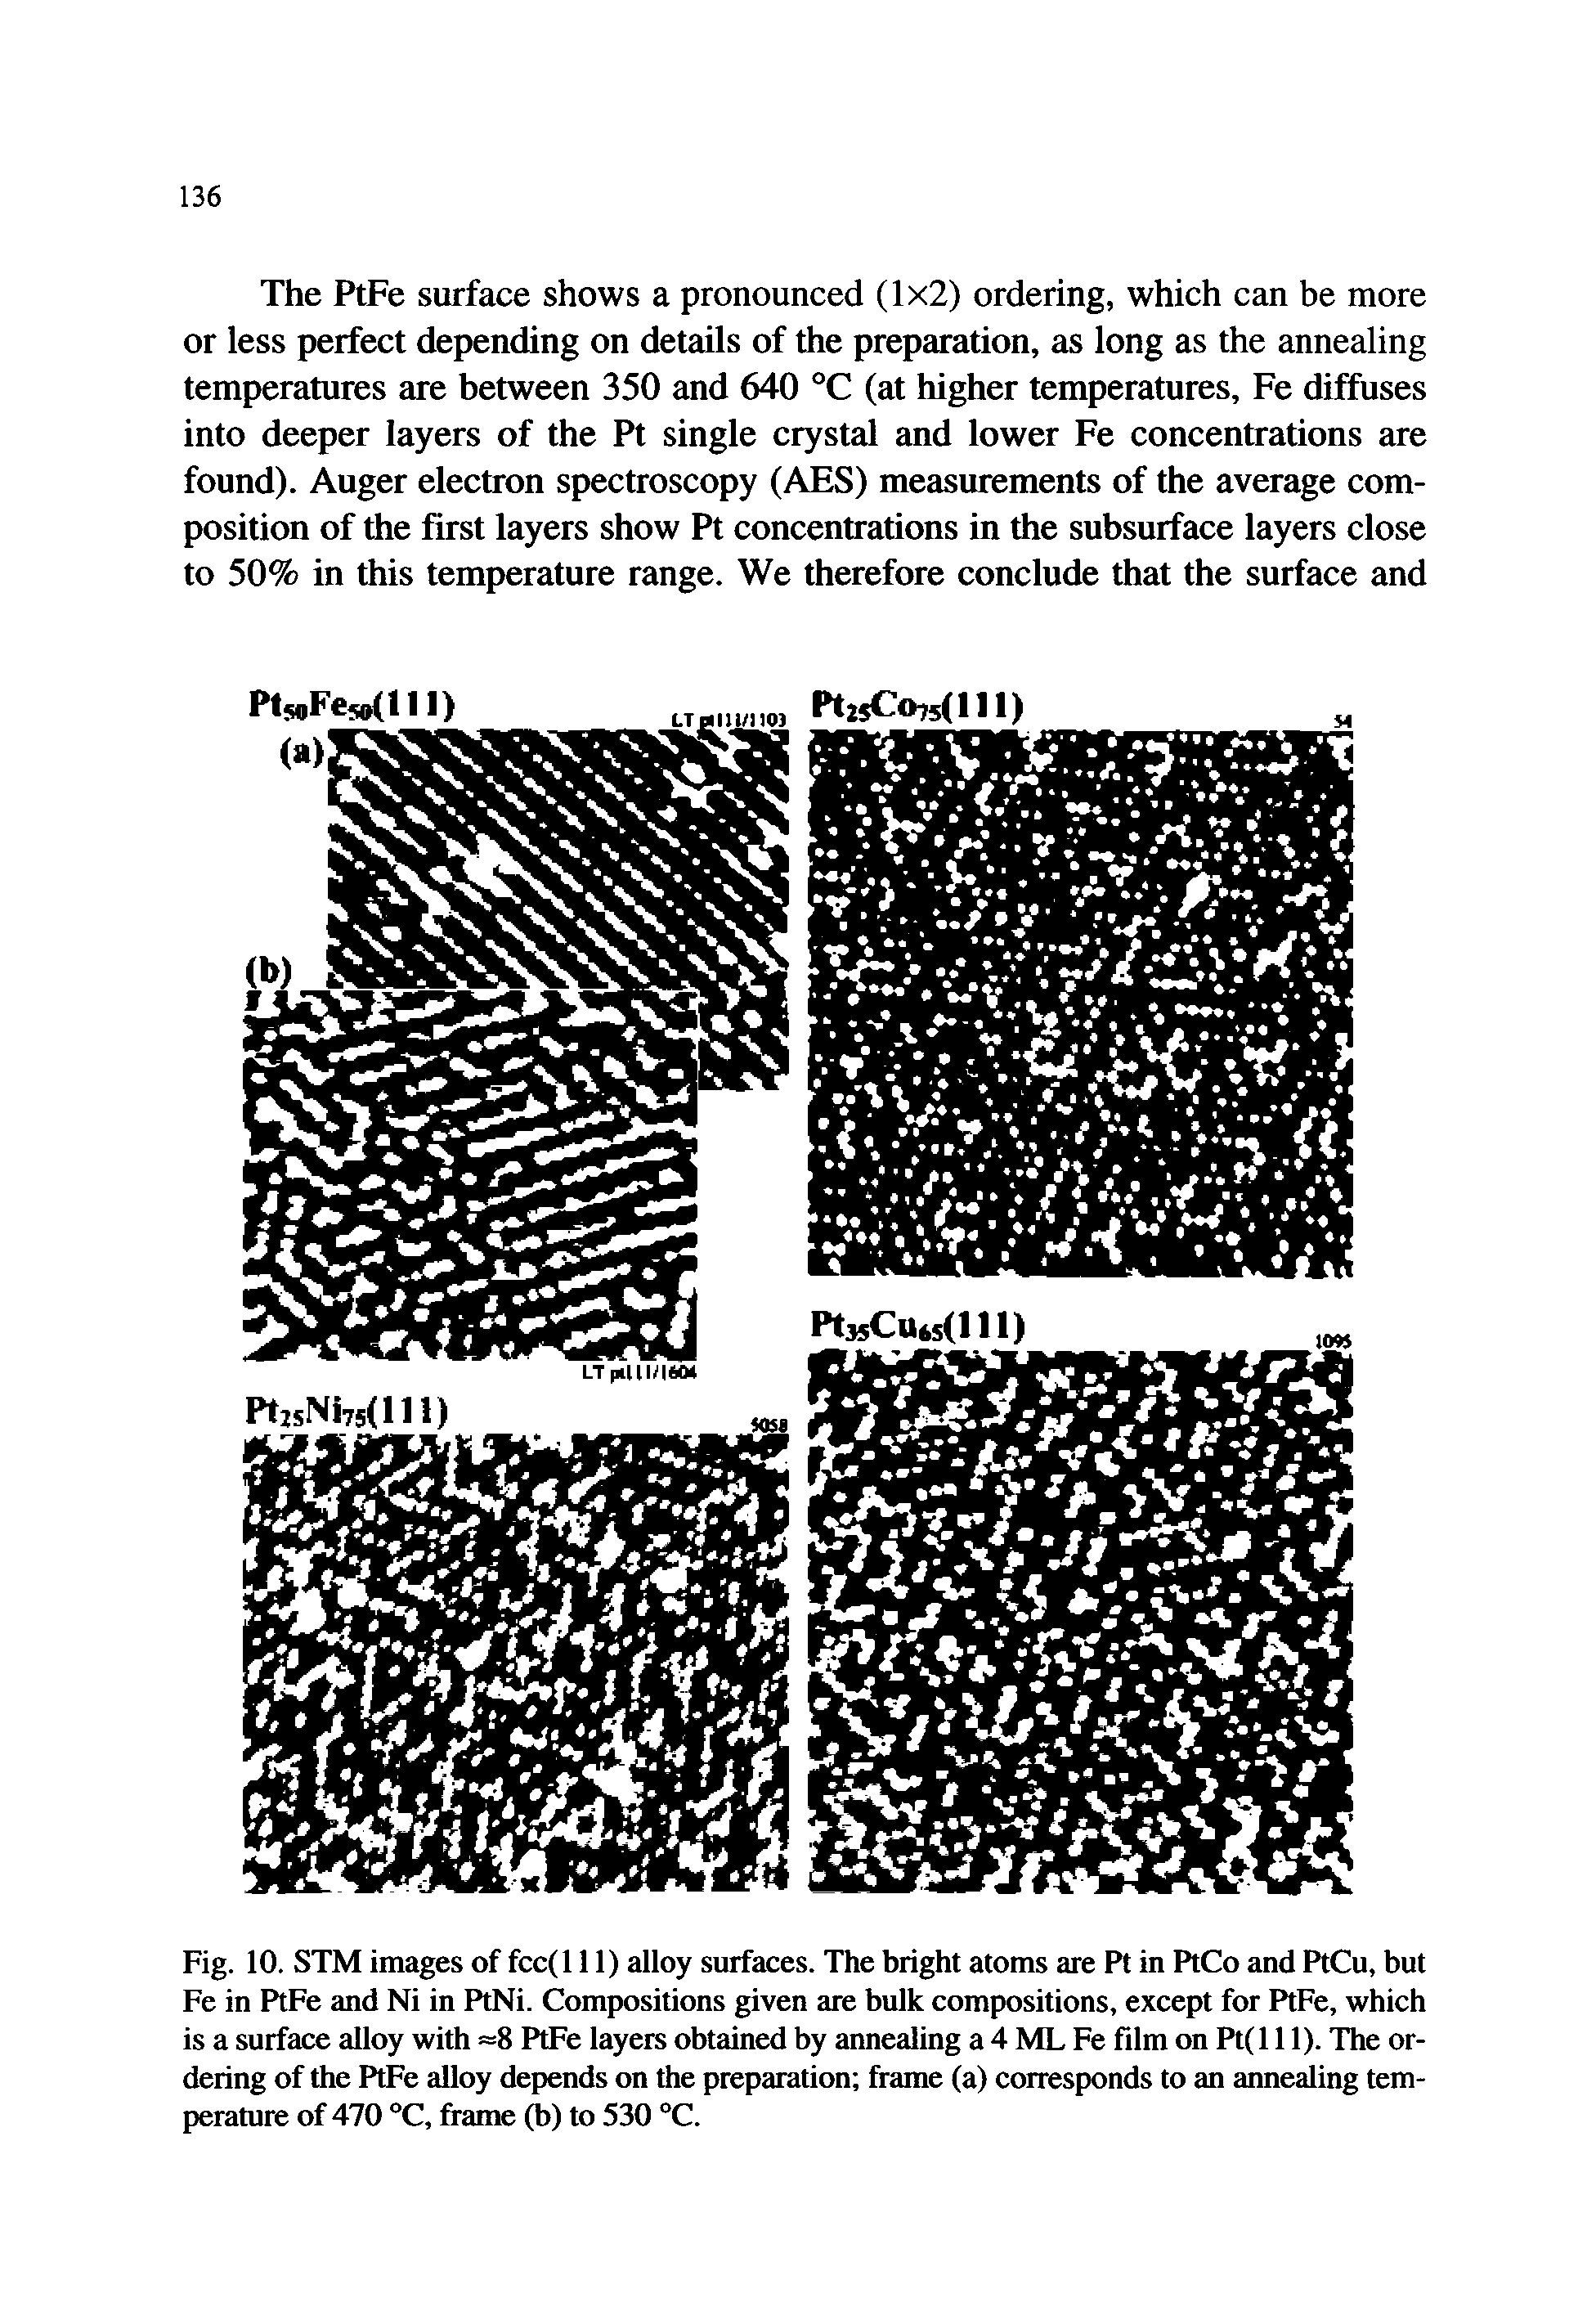 Fig. 10. STM images of fcc(l 11) alloy surfaces. The bright atoms are Pt in PtCo and PtCu, but Fe in PtFe and Ni in PtNi. Compositions given are bulk compositions, except for PtFe, which is a surface alloy with =8 PtFe layers obtained by annealing a4 ML Fe film on Pt(111). The ordering of the PtFe alloy depends on the preparation frame (a) corresponds to an annealing tem-peramre of 470 °C, frame (b) to 530 C.